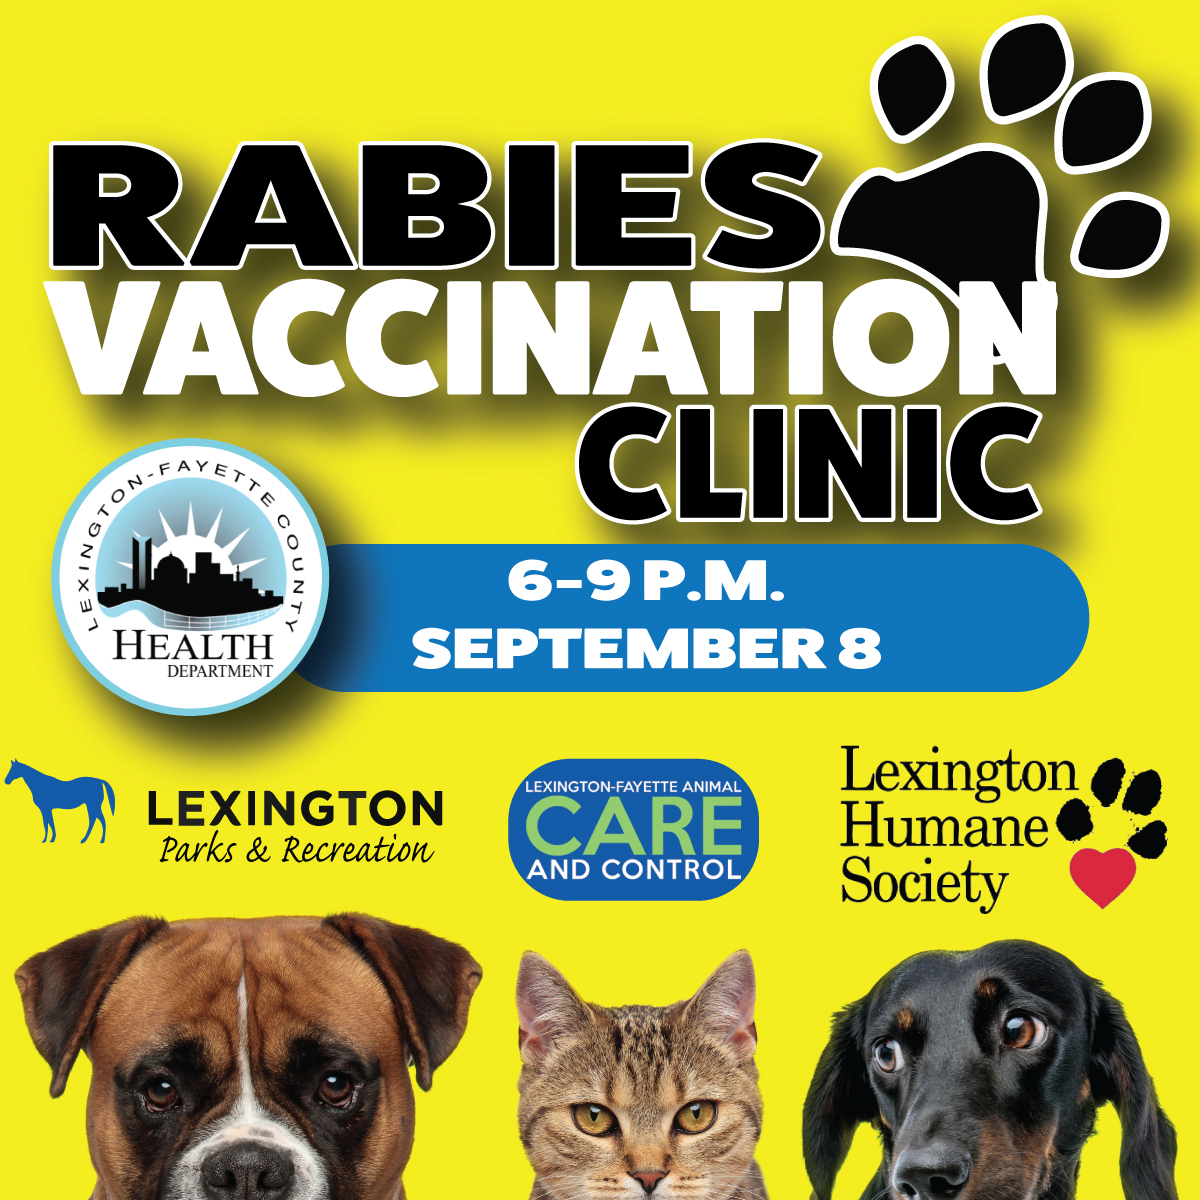 Health department to hold low-cost rabies vaccination clinic Sept. 8 